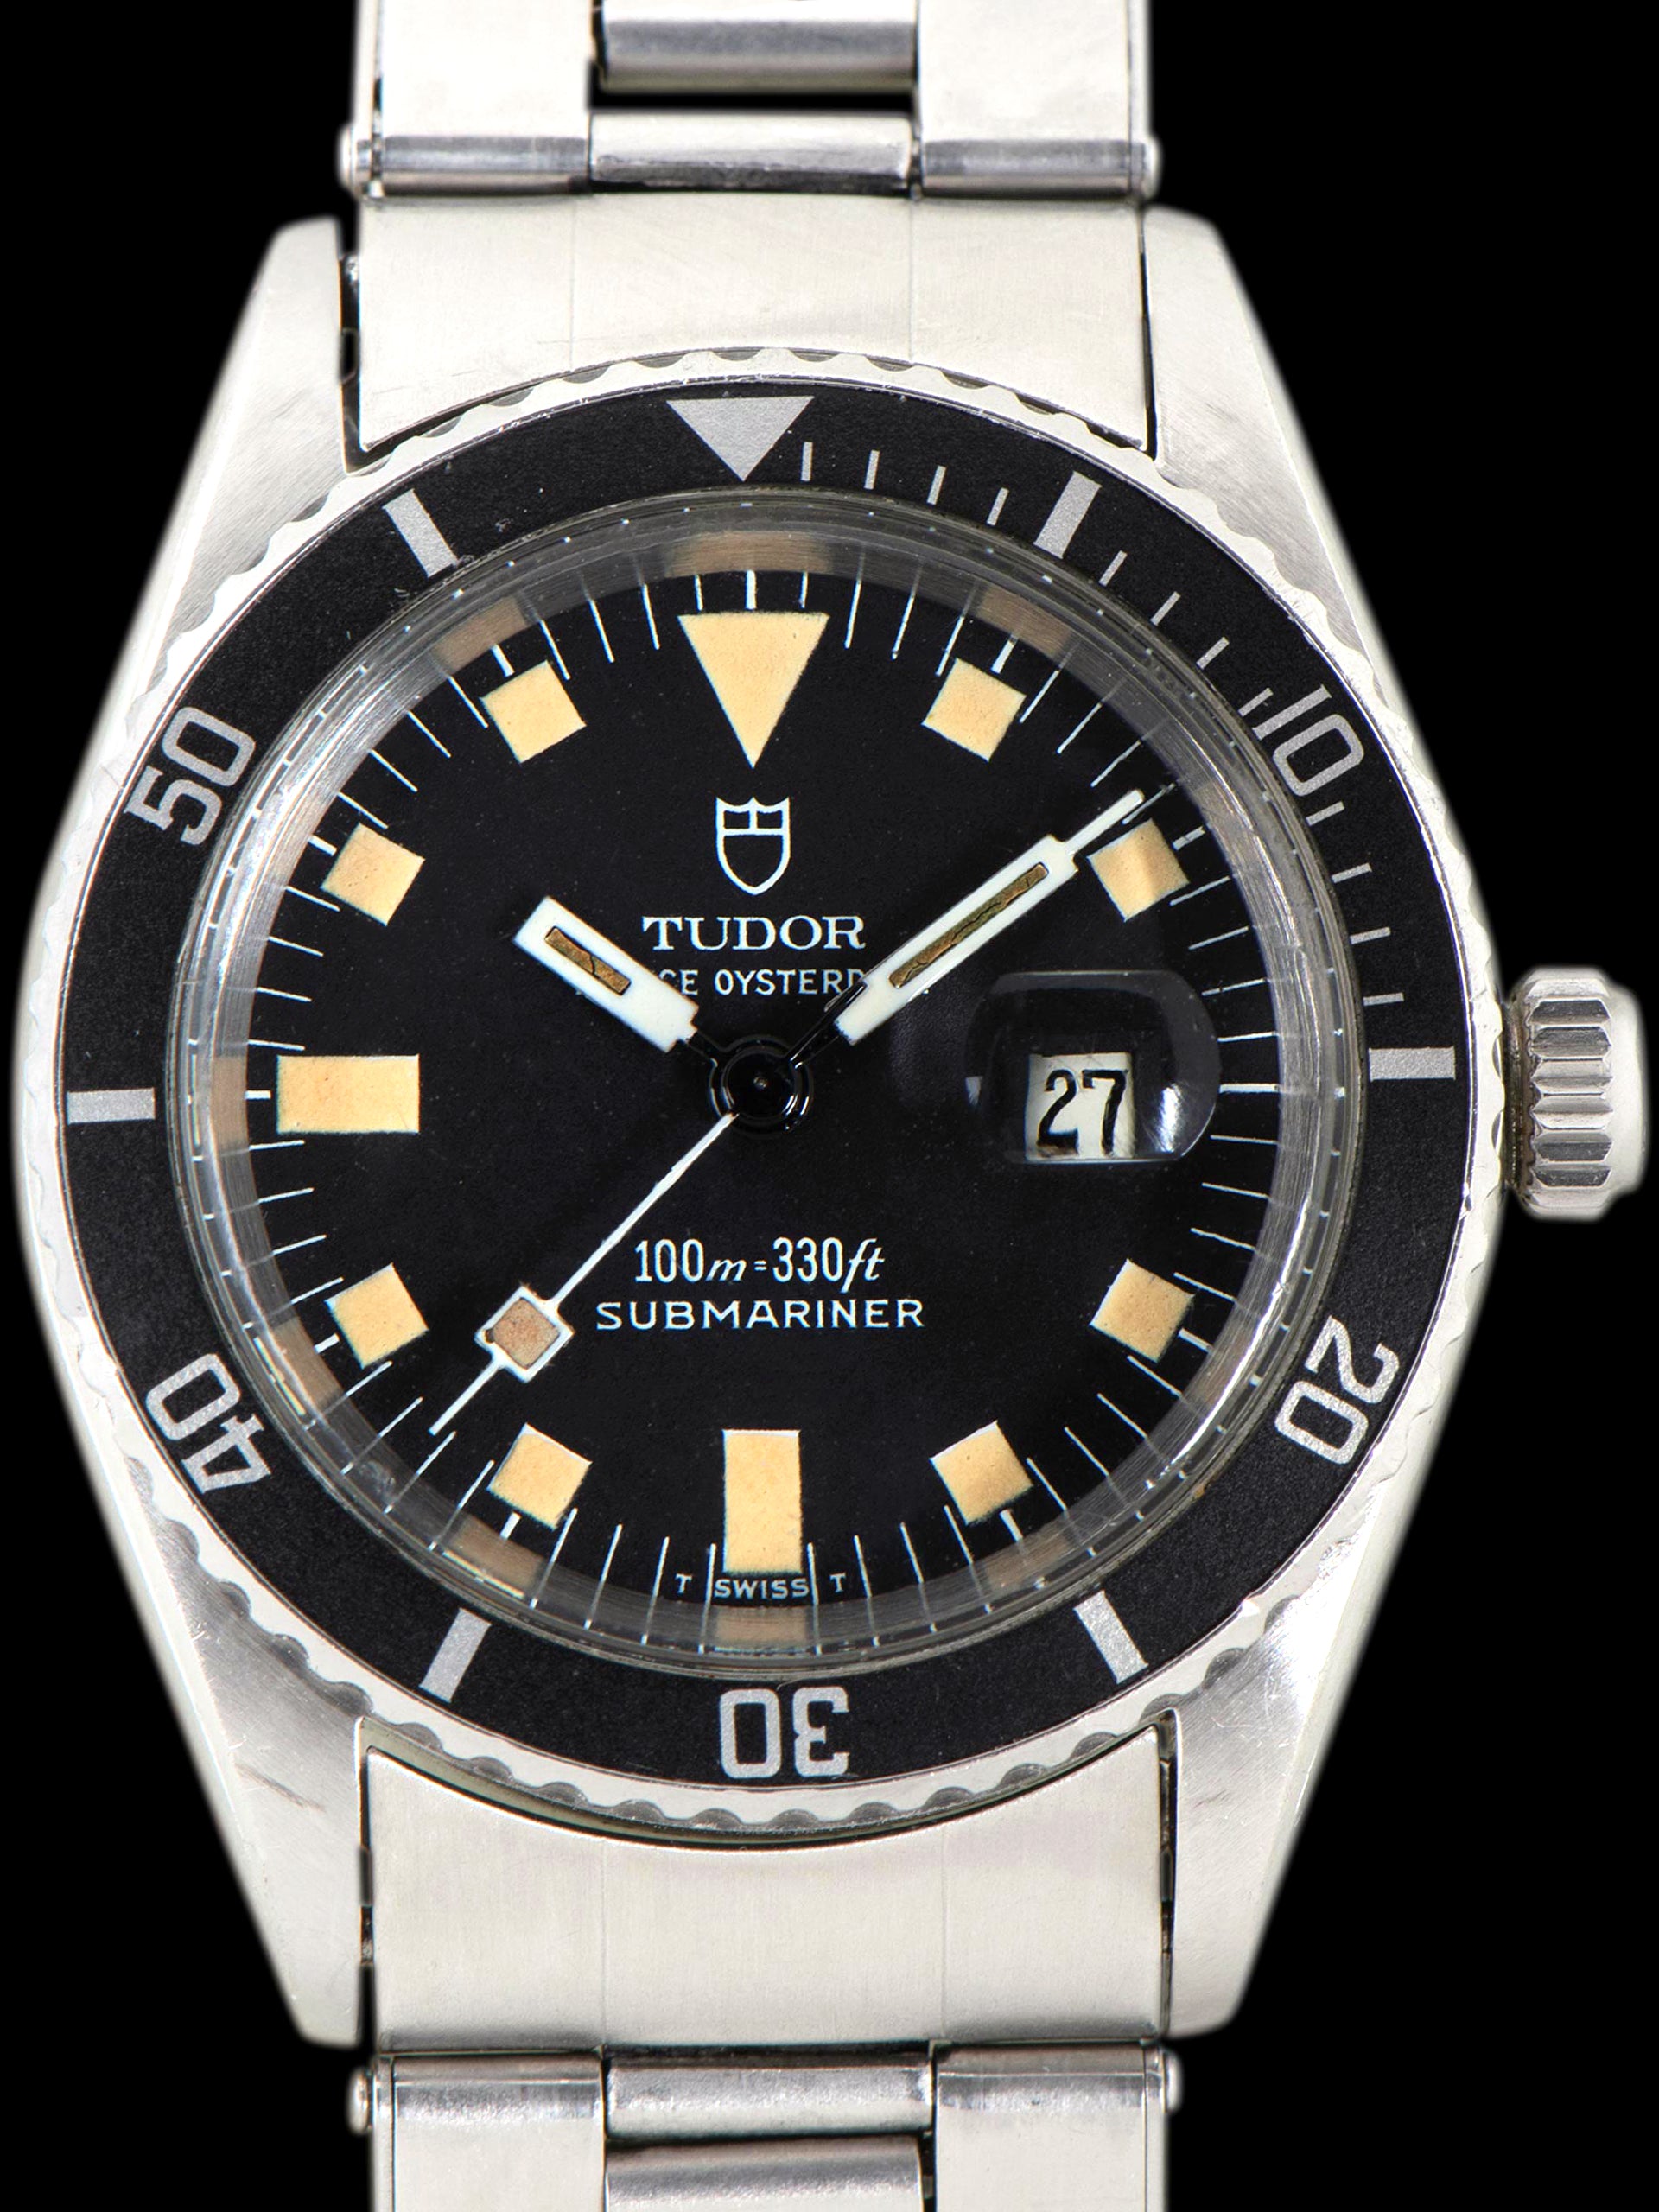 *Unpolished* 1978 Tudor Mini-Submariner (Ref. 9091/0) W/ Box, Papers, & Early Service Receipt